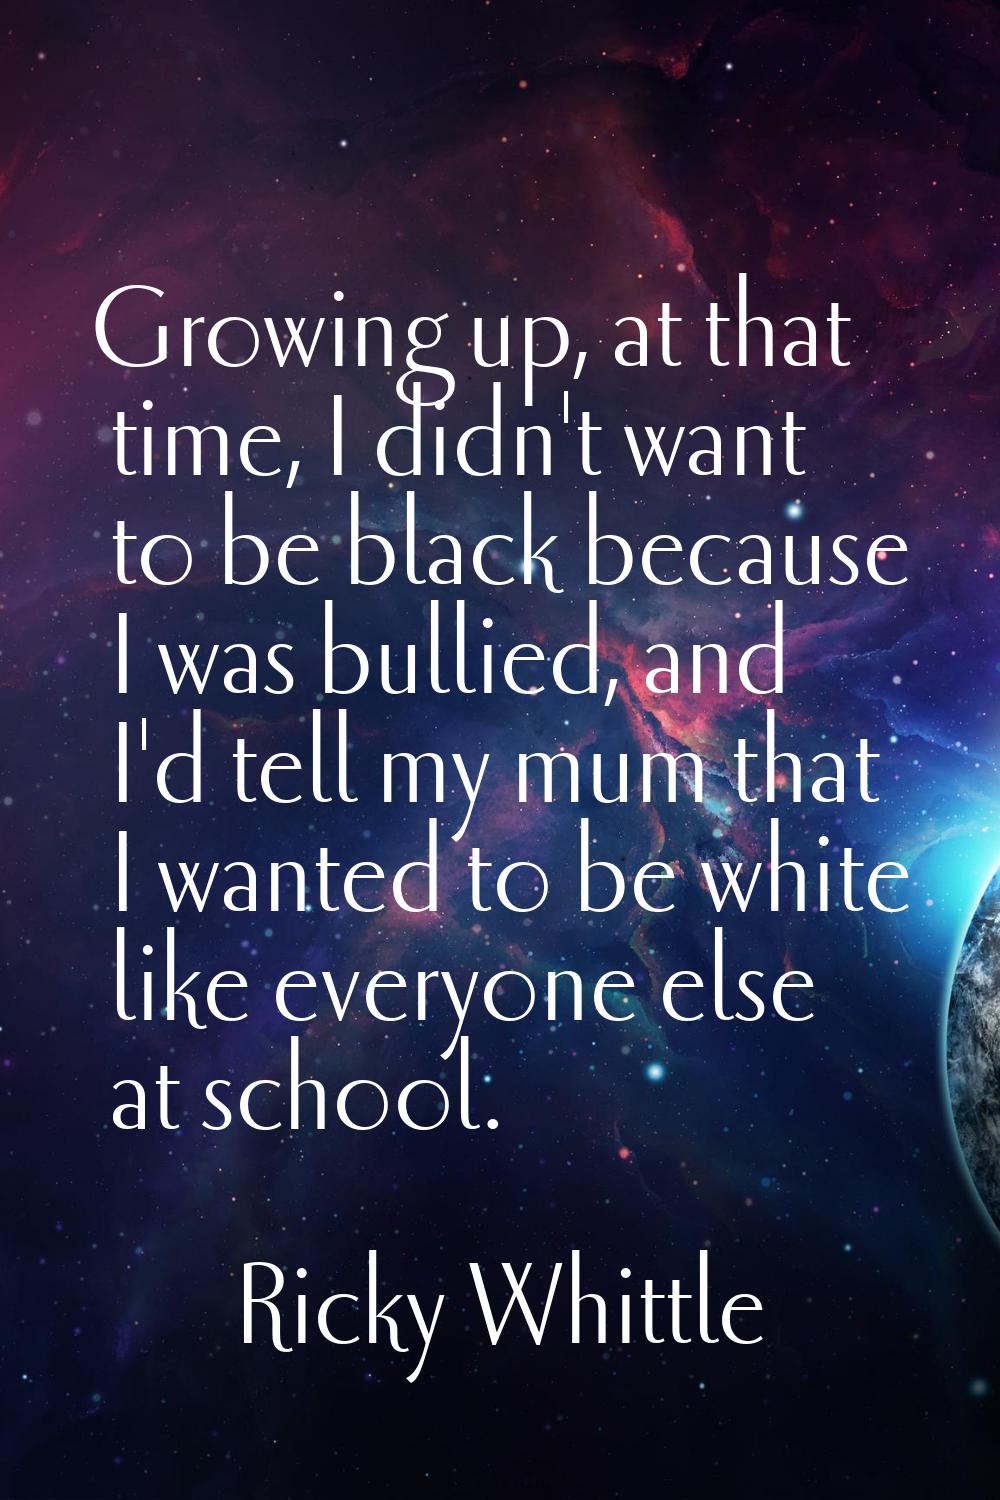 Growing up, at that time, I didn't want to be black because I was bullied, and I'd tell my mum that